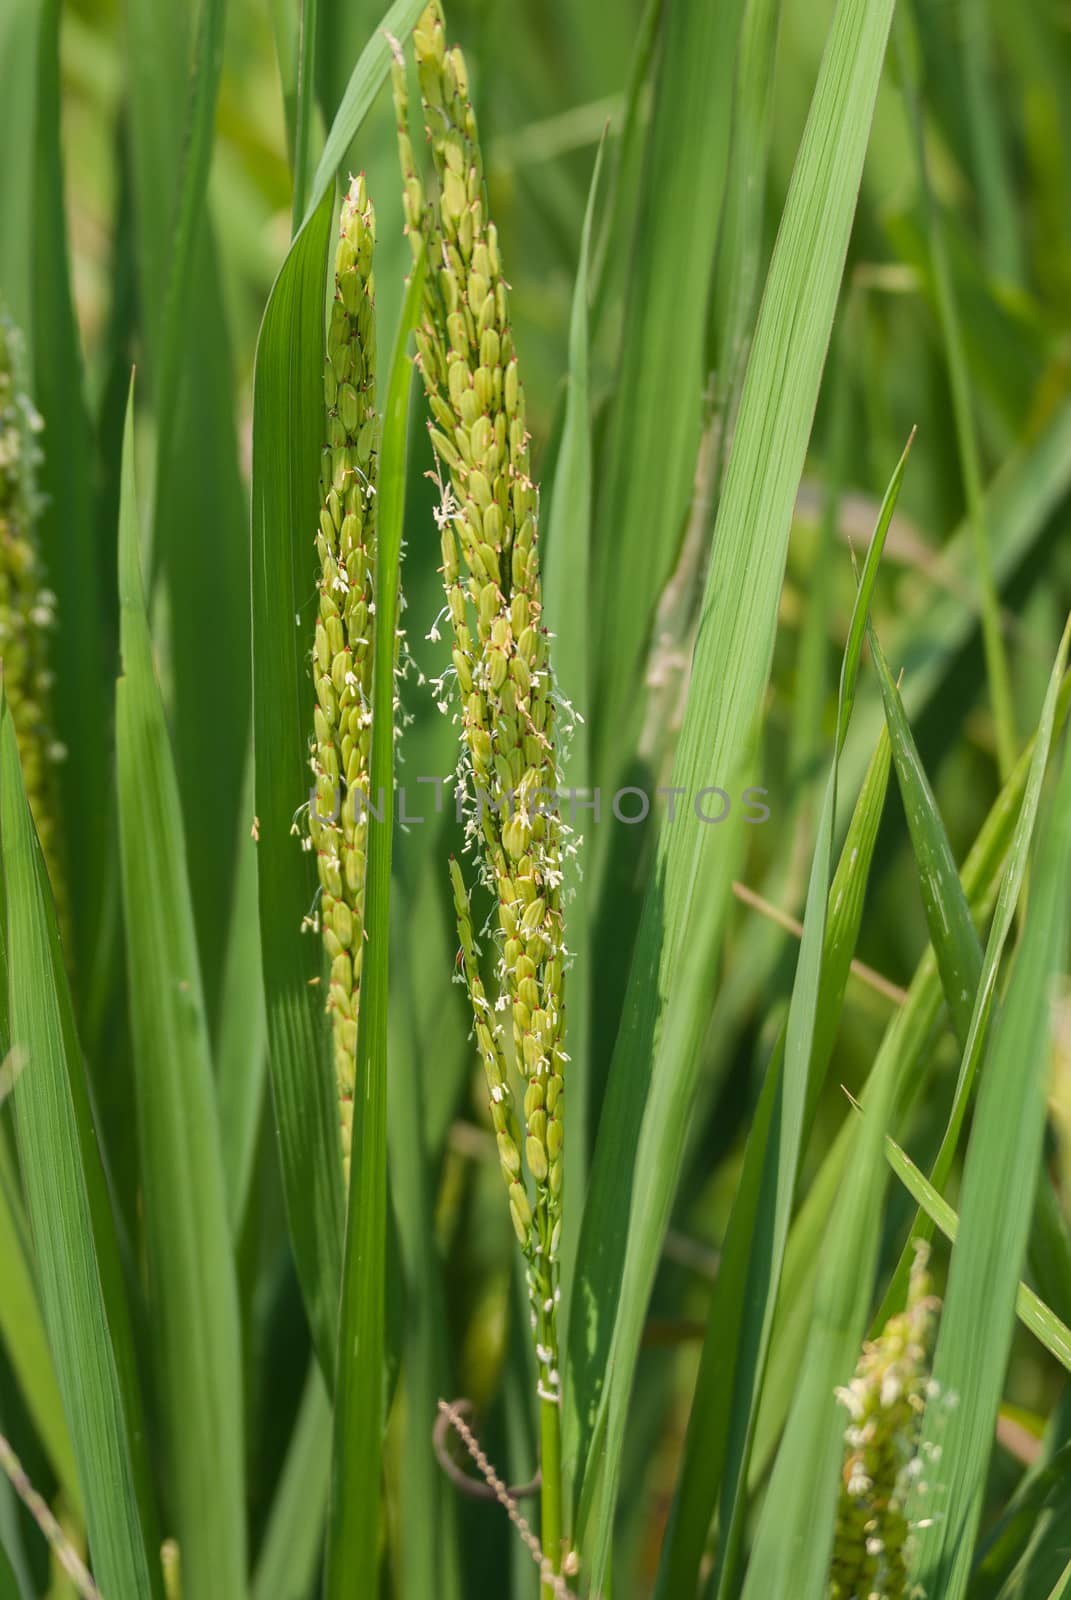 Focus on riping rice stalks, kernels and flower clearly visible.